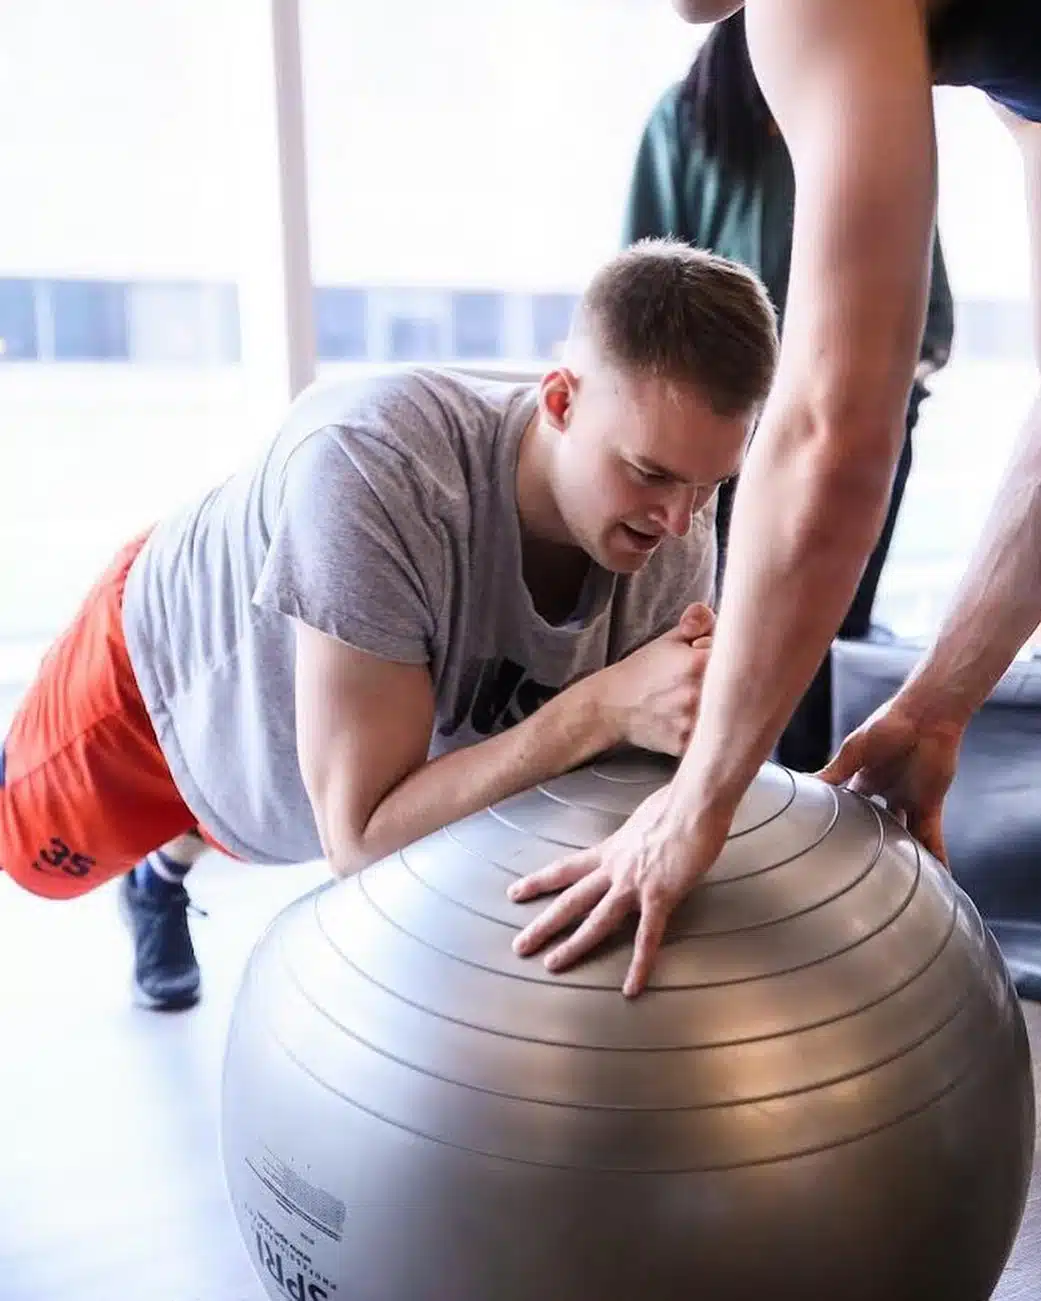 An athlete does core exercises on a medicine ball with guidance from his coach